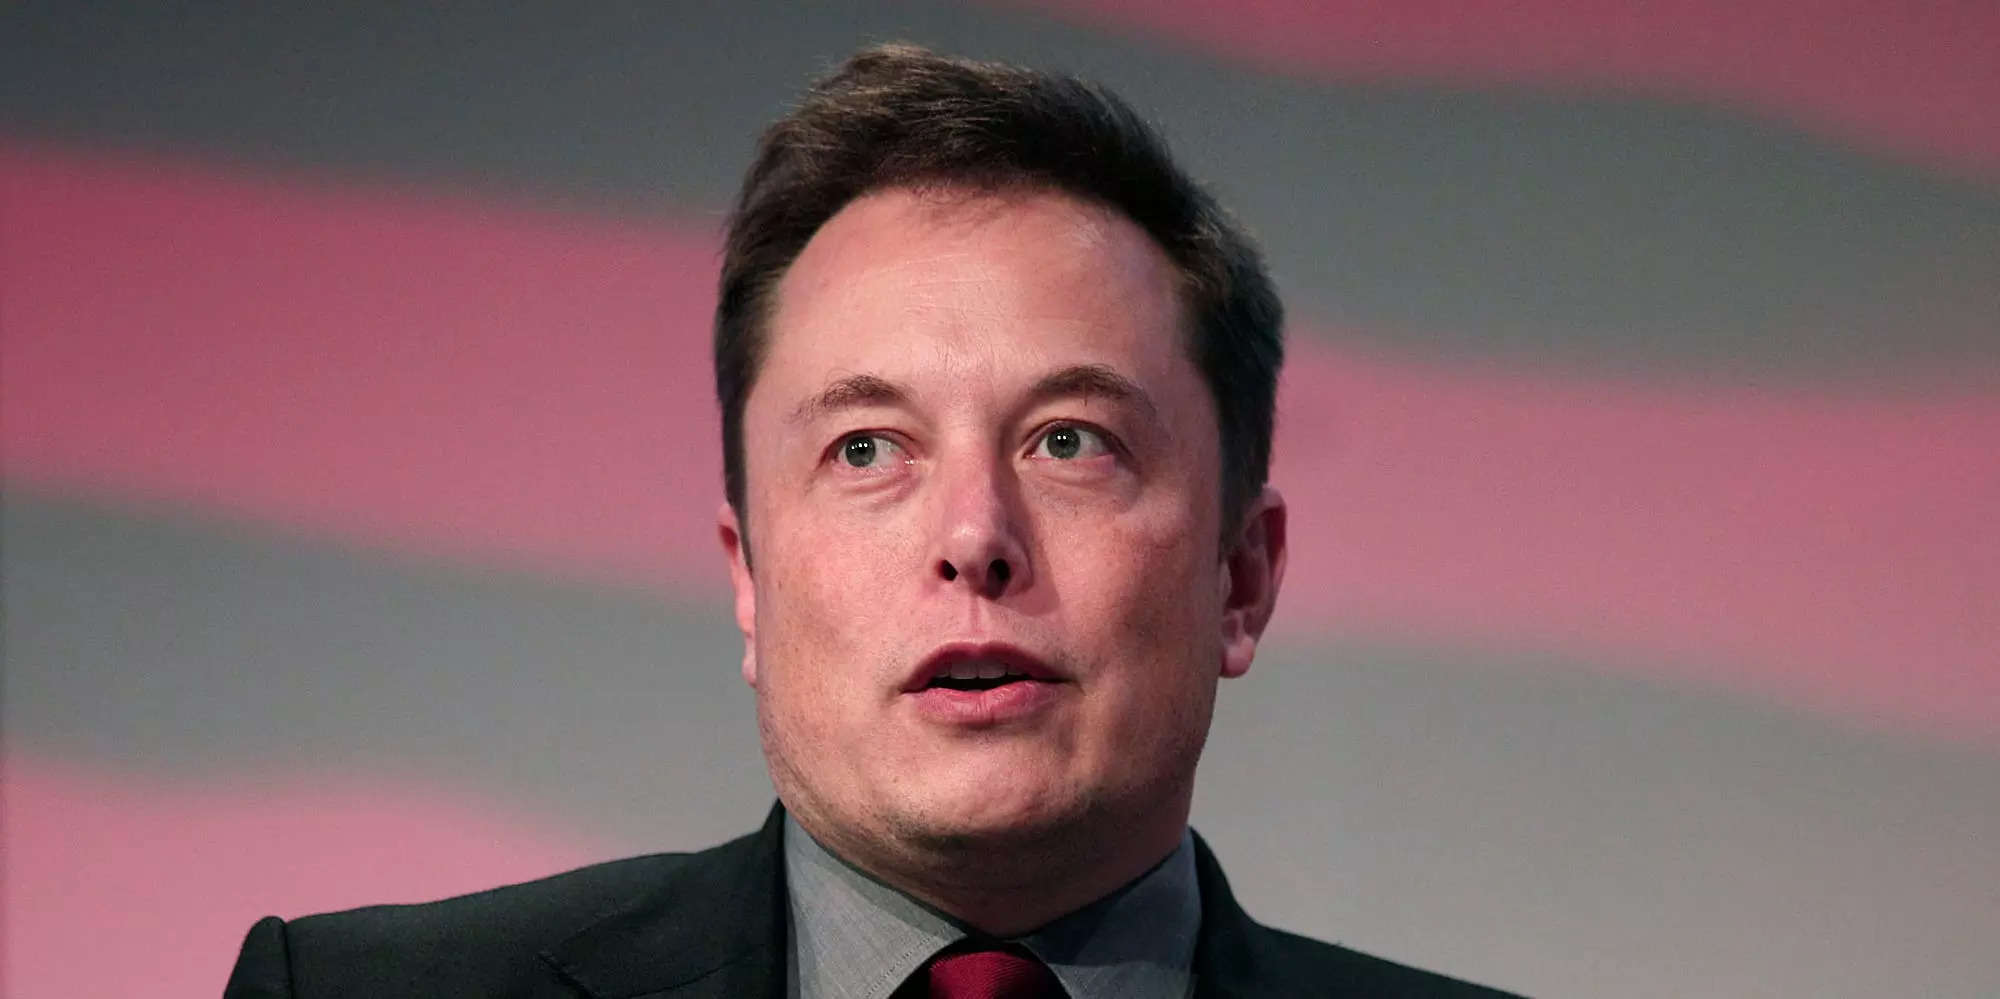 elon musk bemoans selling tesla stock to buy twitter - and pokes fun at michael burry for deleting his profile | business insider india